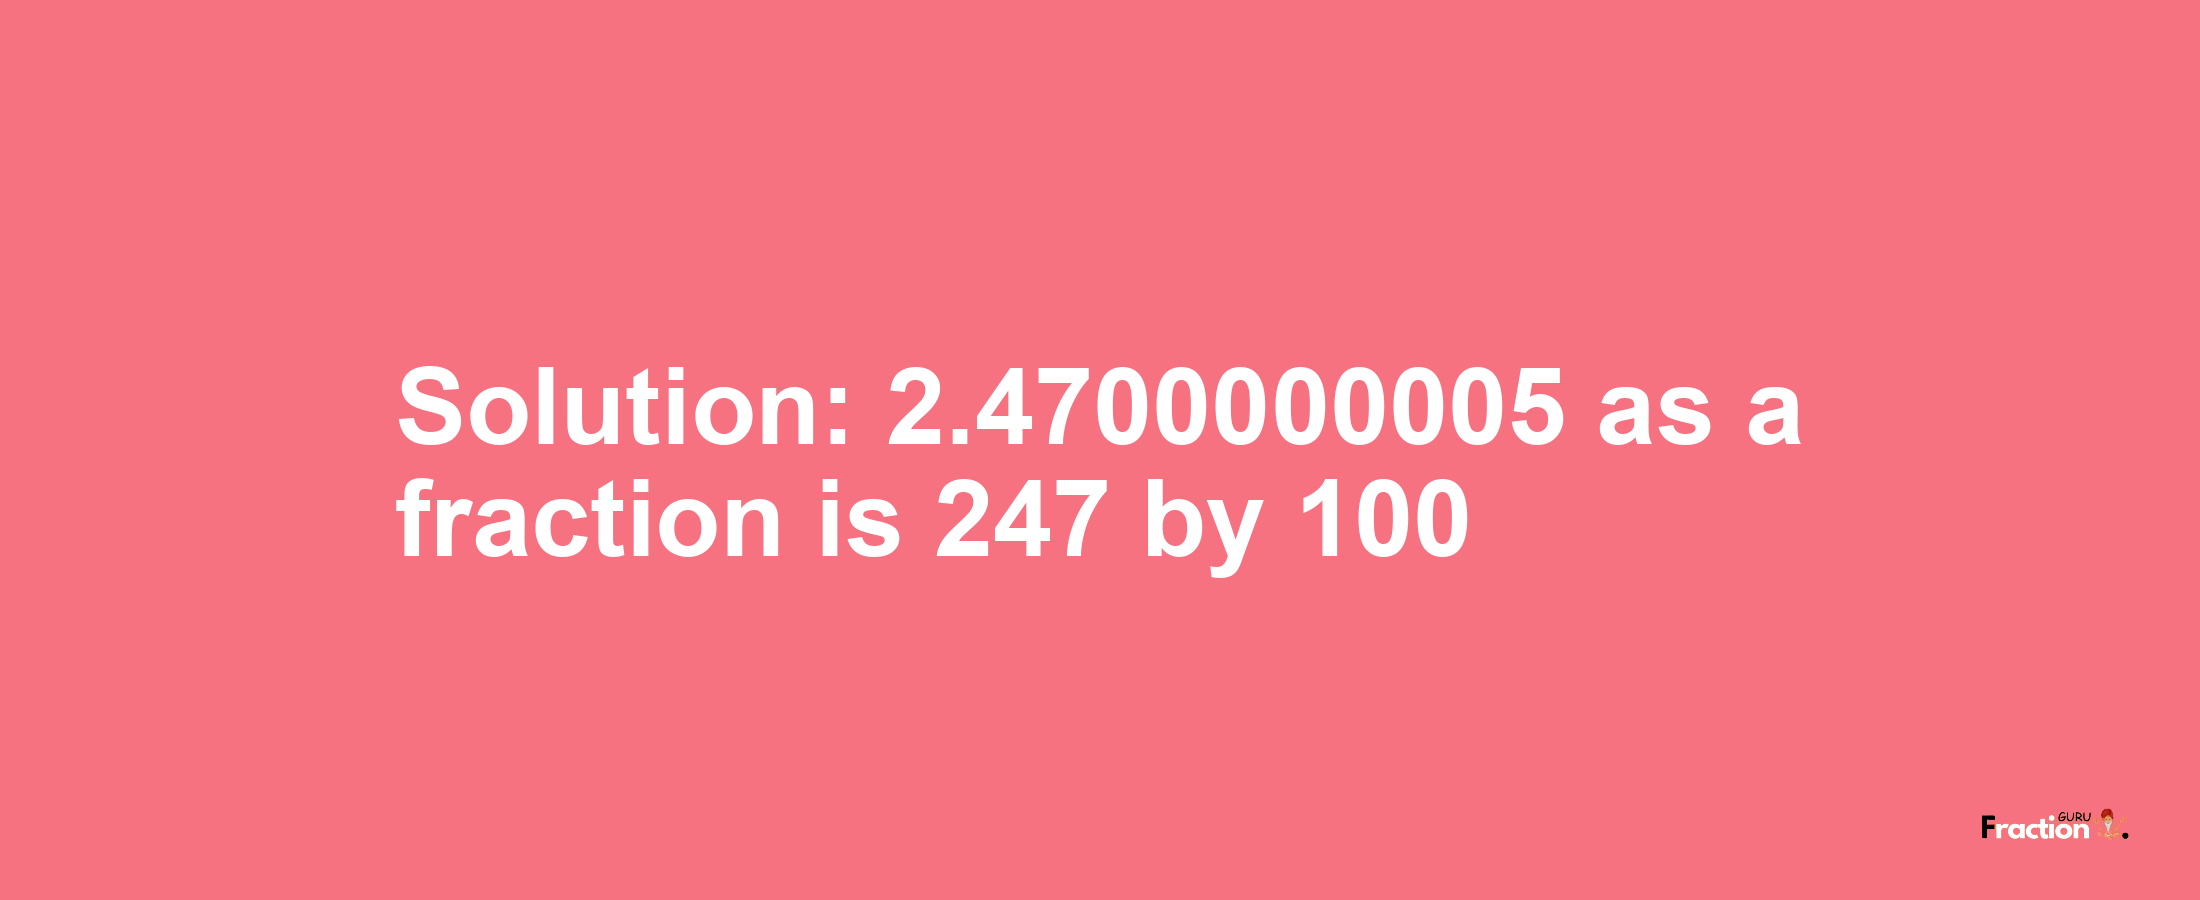 Solution:2.4700000005 as a fraction is 247/100